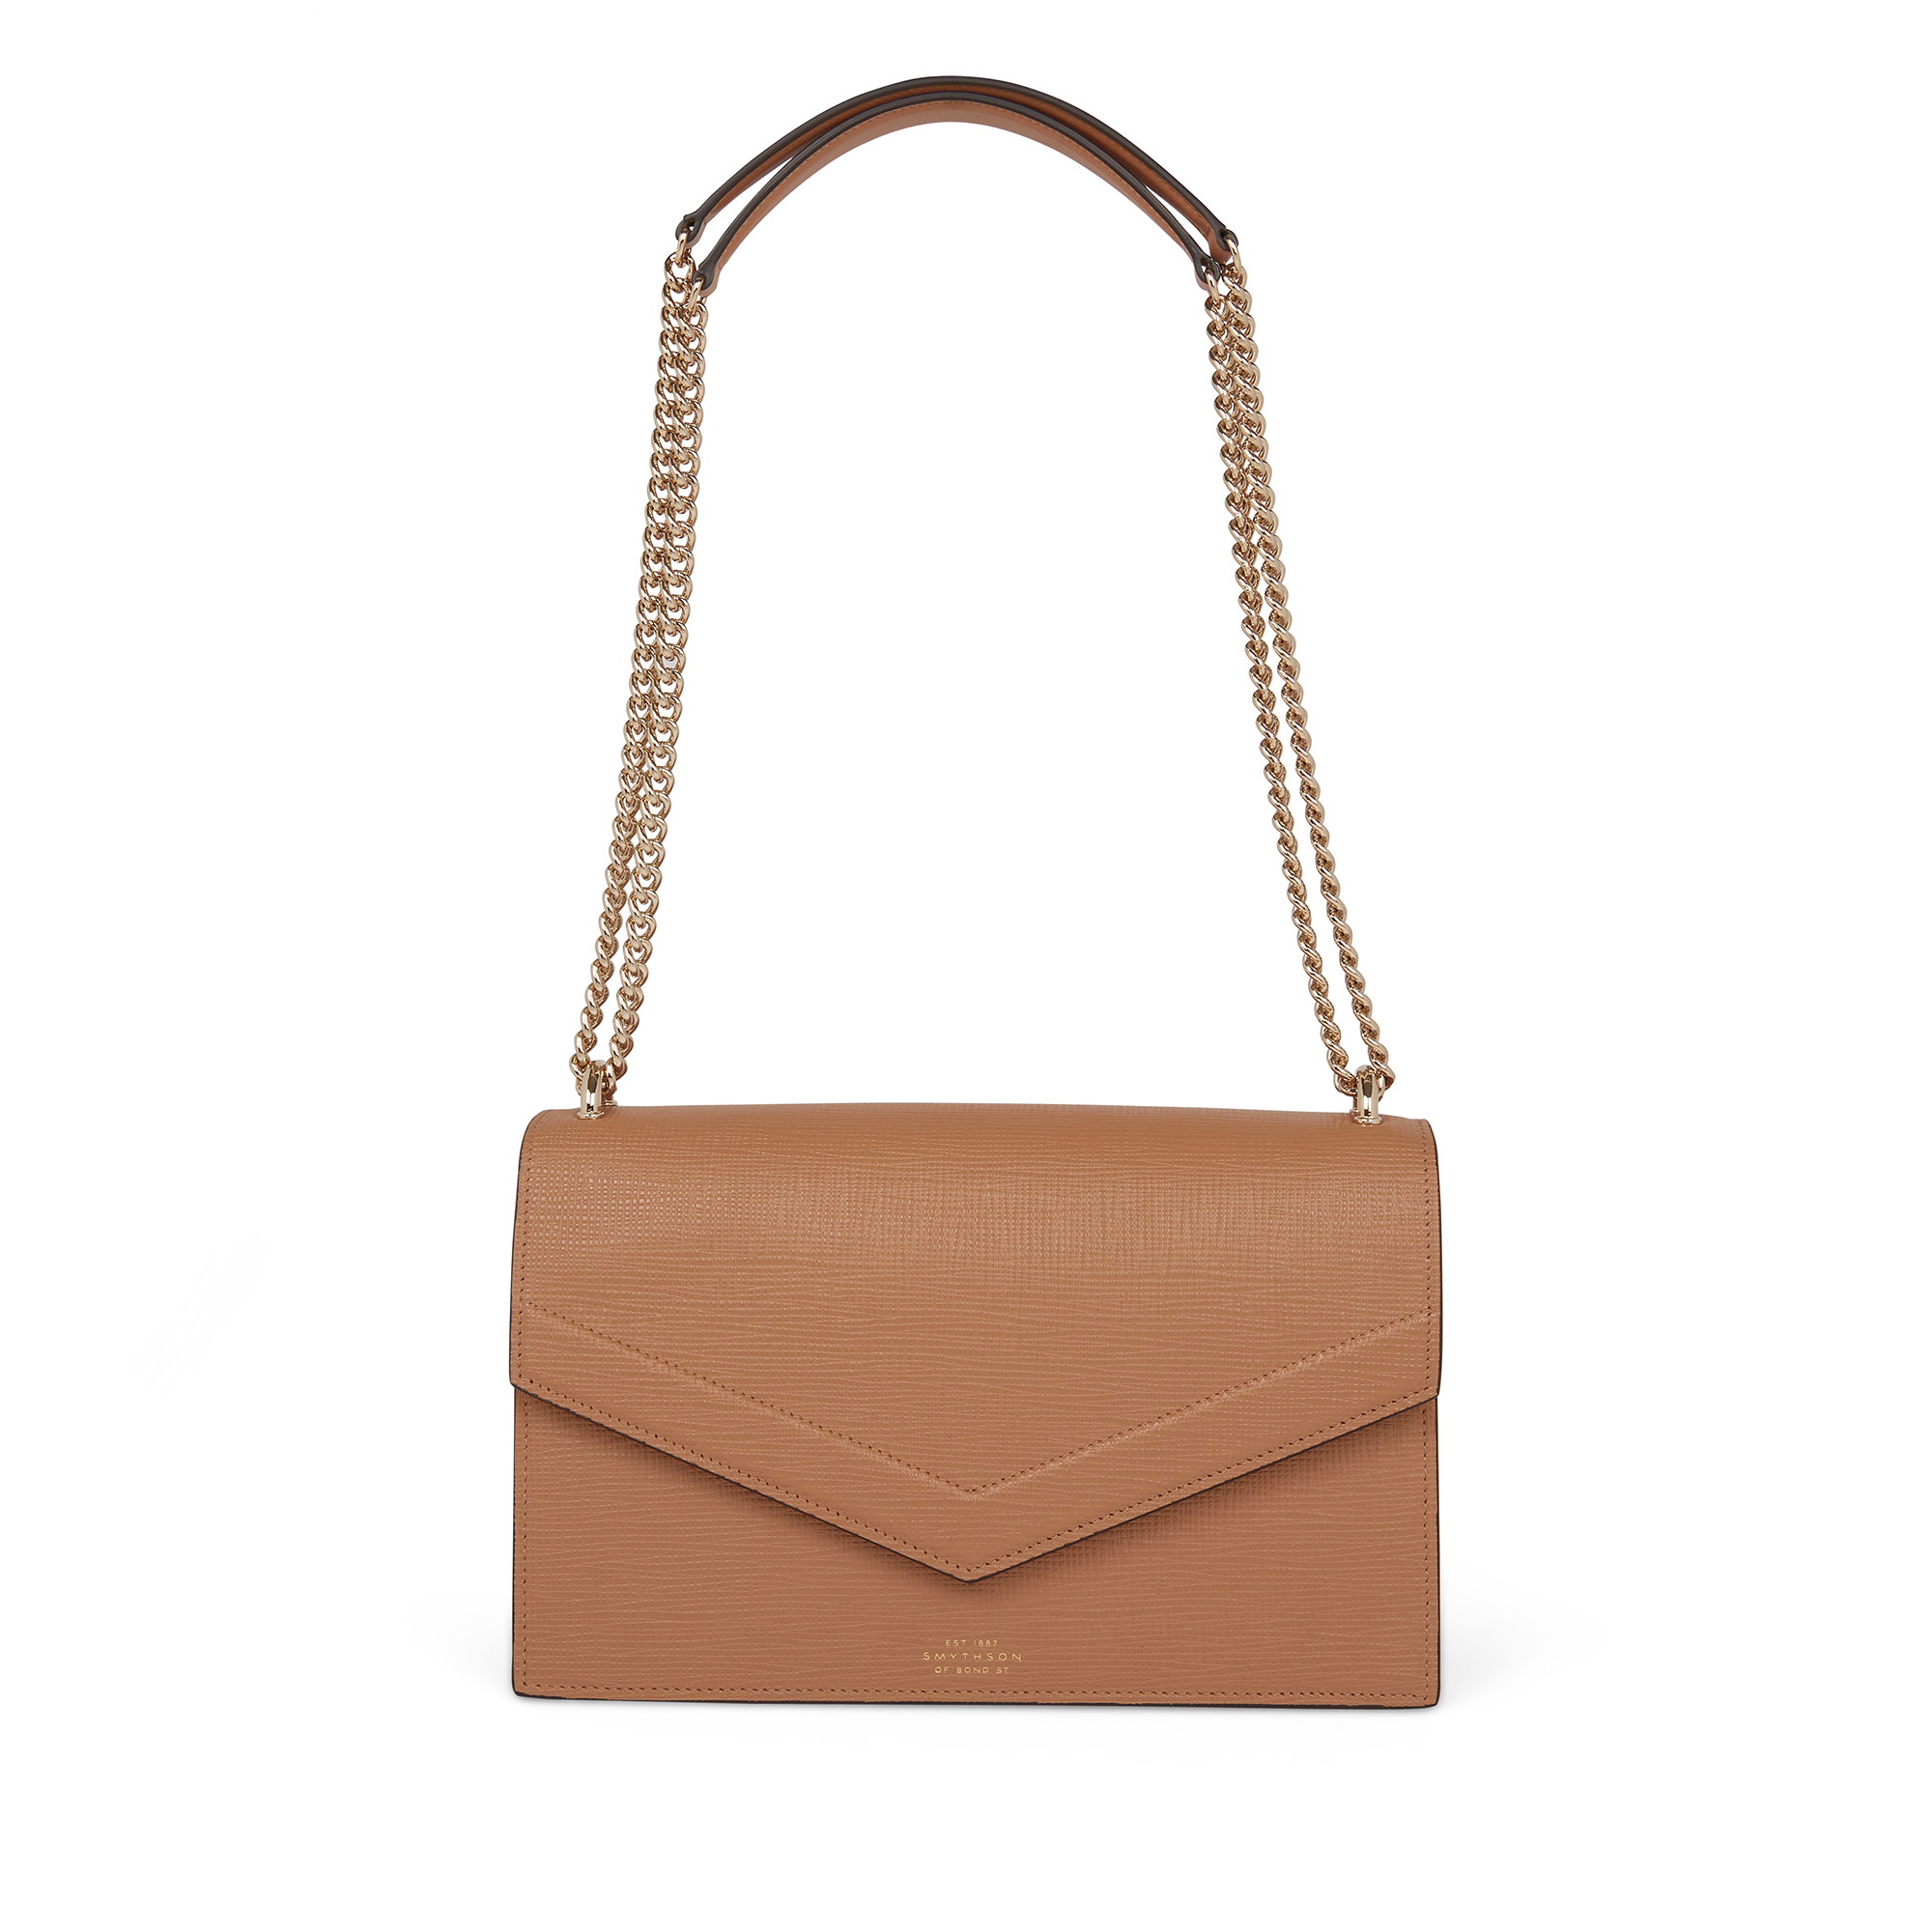 Smythson Envelope Bag With Chain In Panama In Light Rosewood